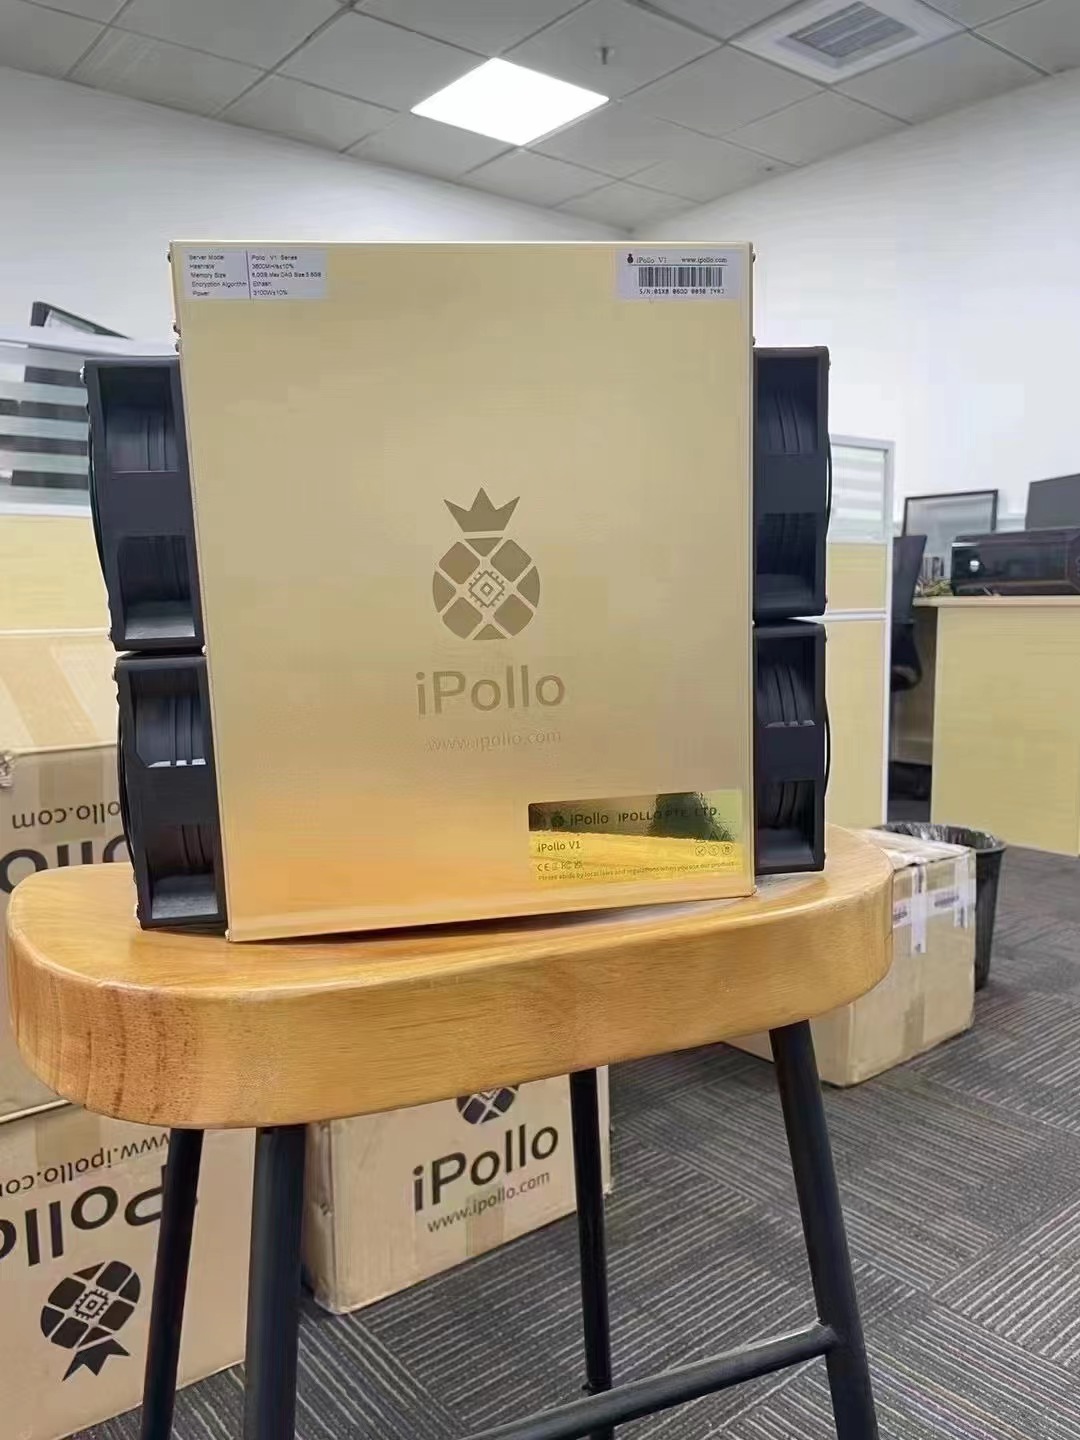 Brand New in stock iPollo V1 3600Mh/s 3100W Ethash/ETH Asic Miner with PSU and Cord Most Powerful ETH Miner